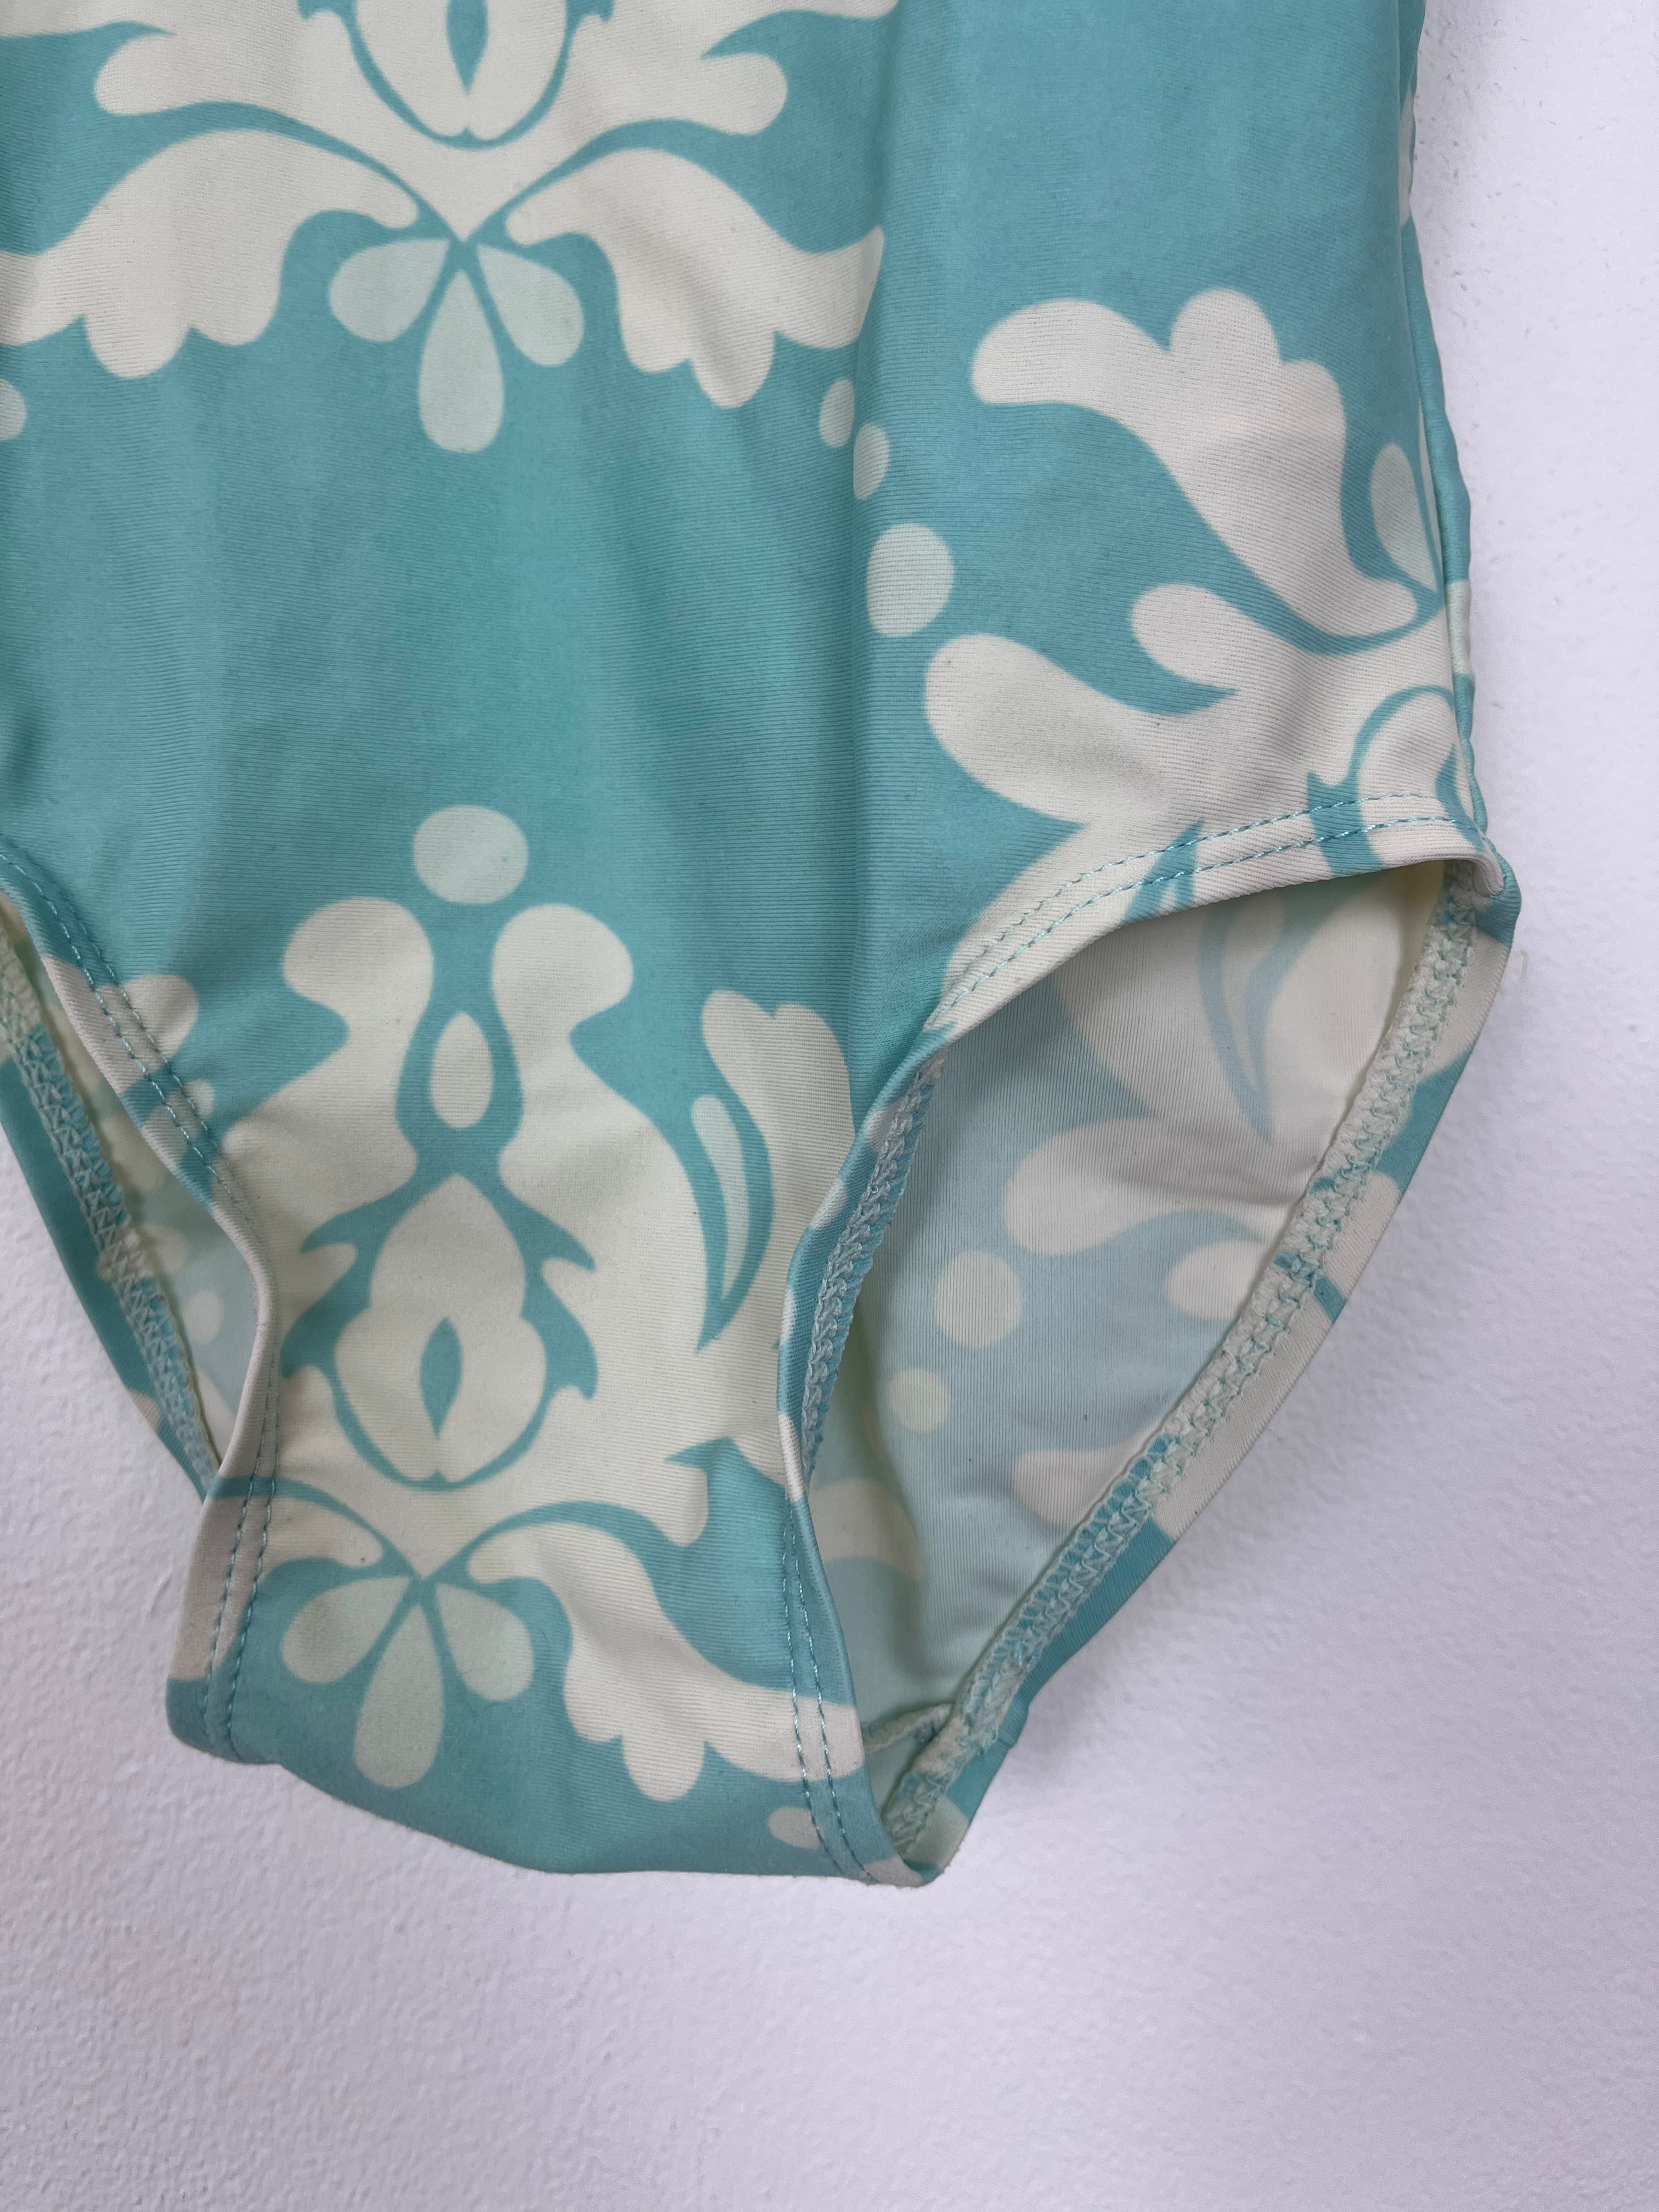 Baby Gap 12-18 Months-Swimming-Second Snuggle Preloved